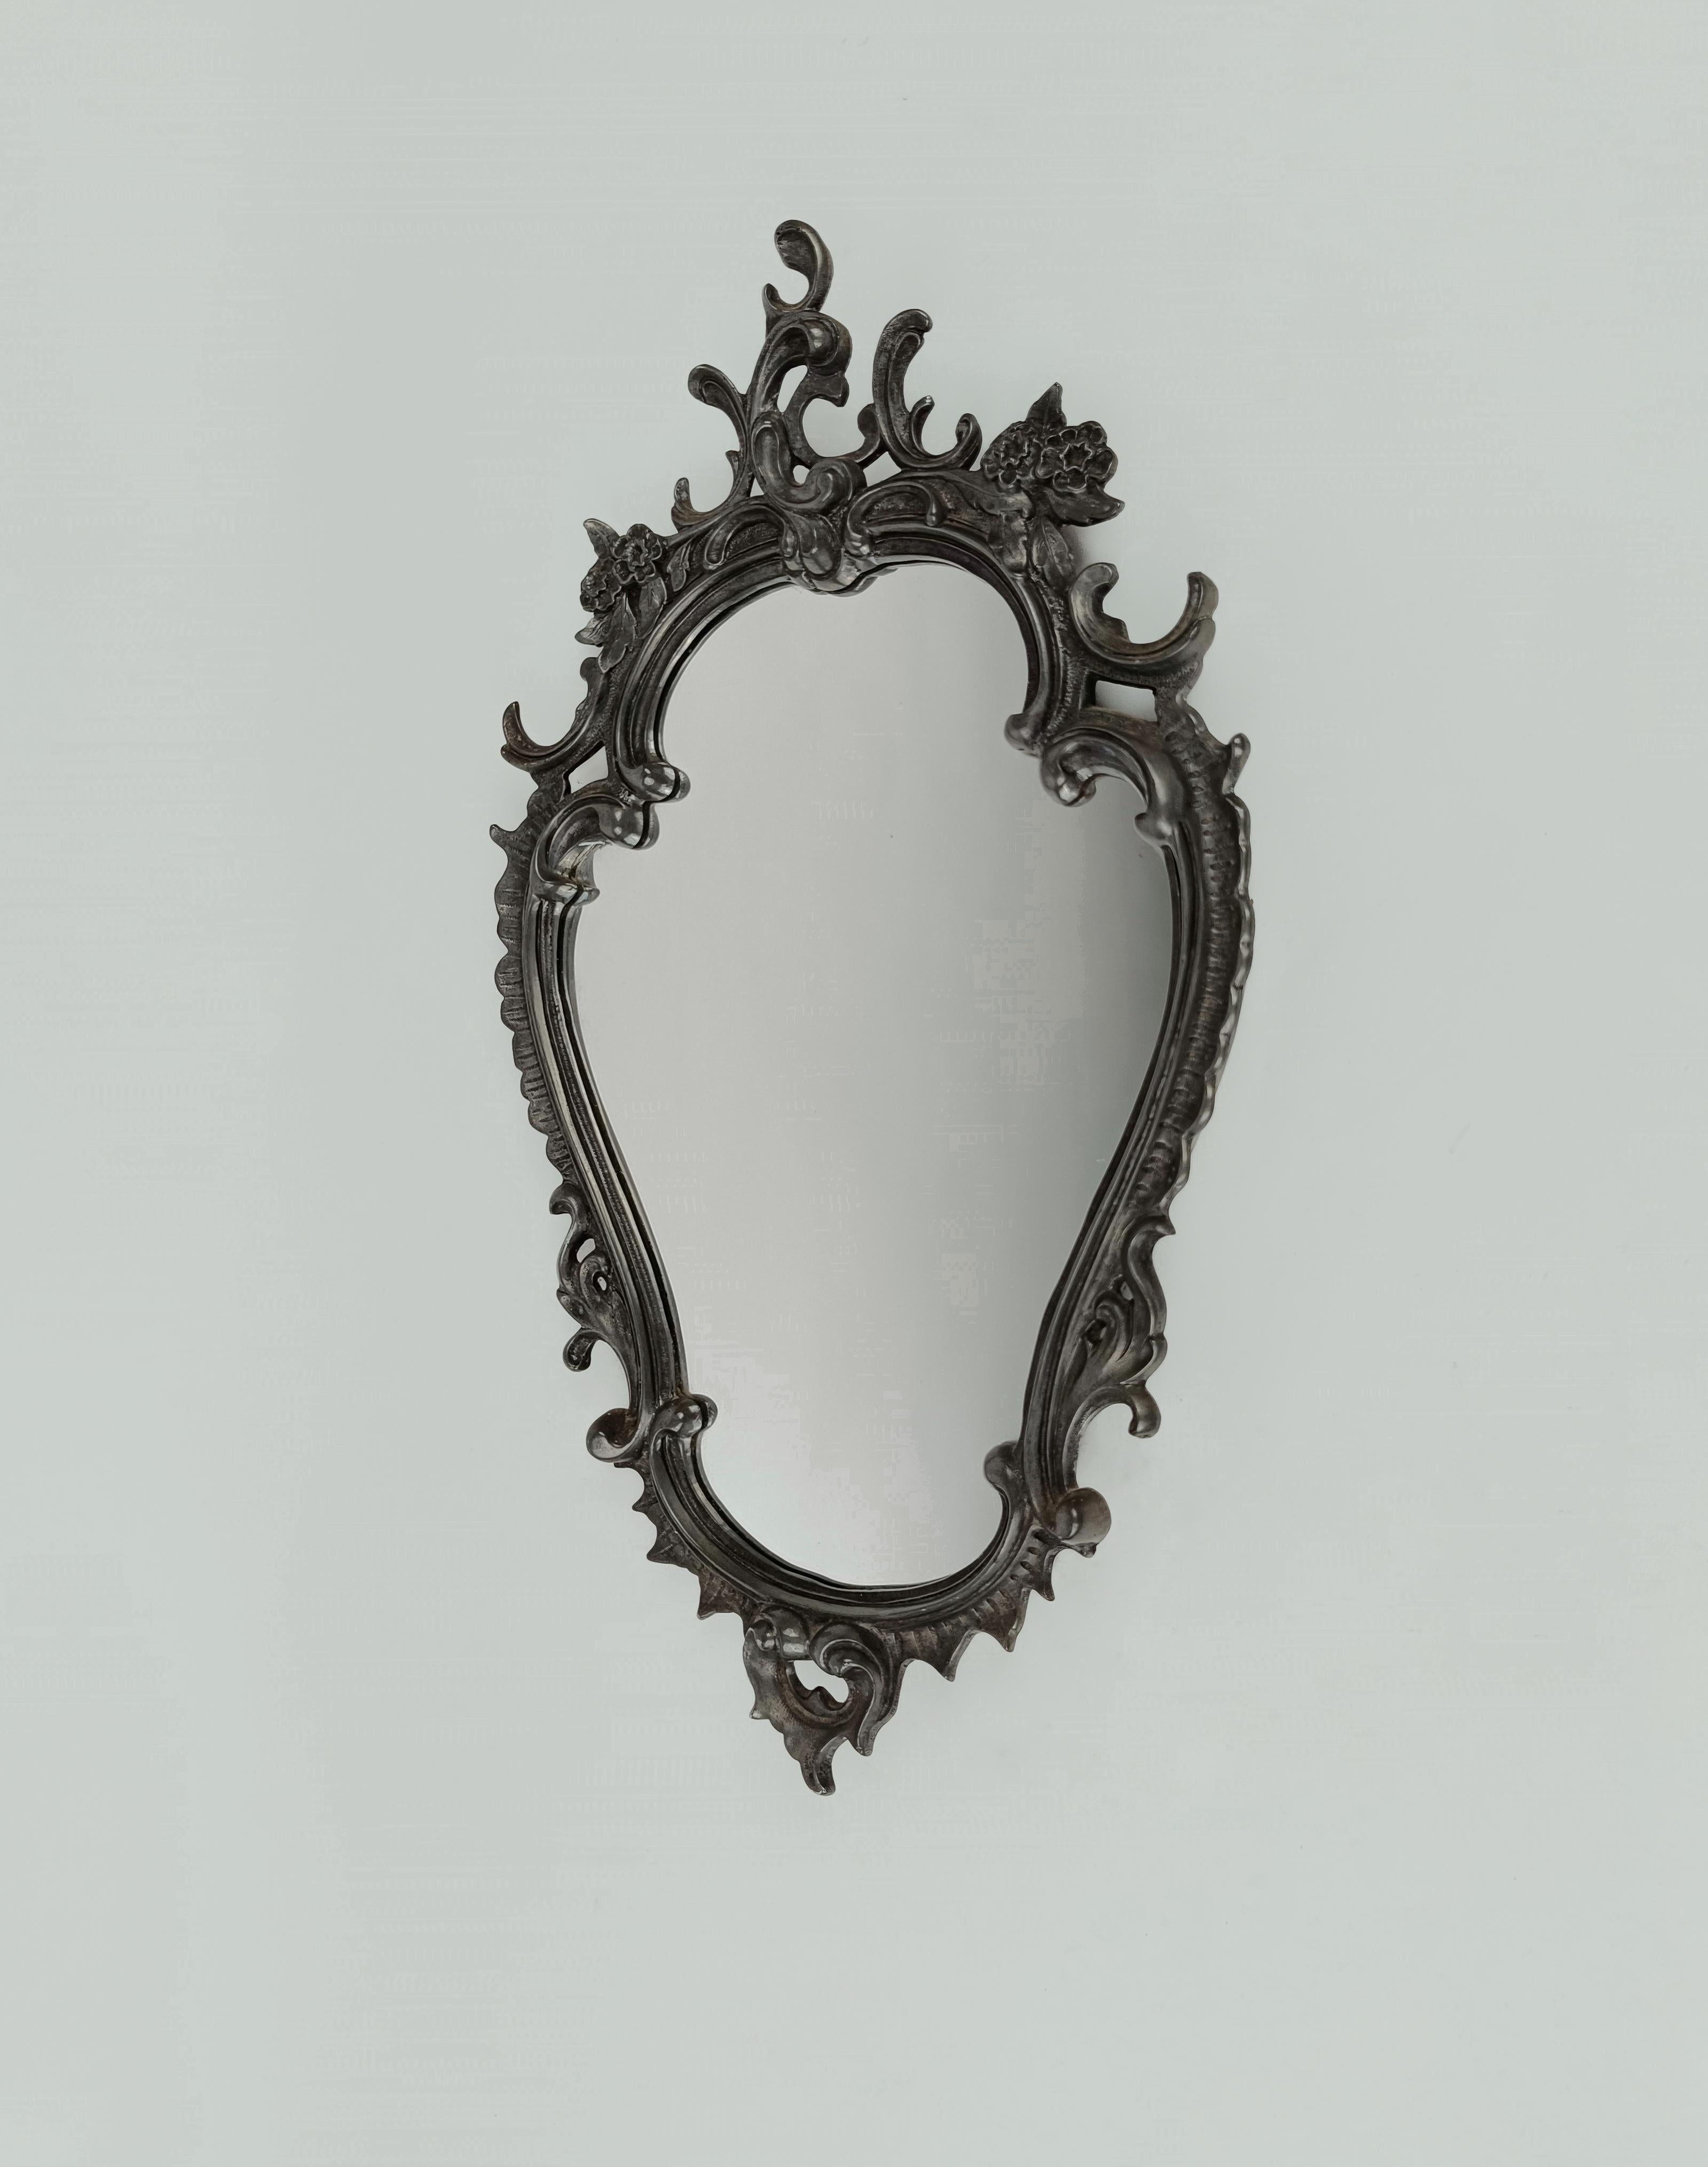 when was the first mirror made